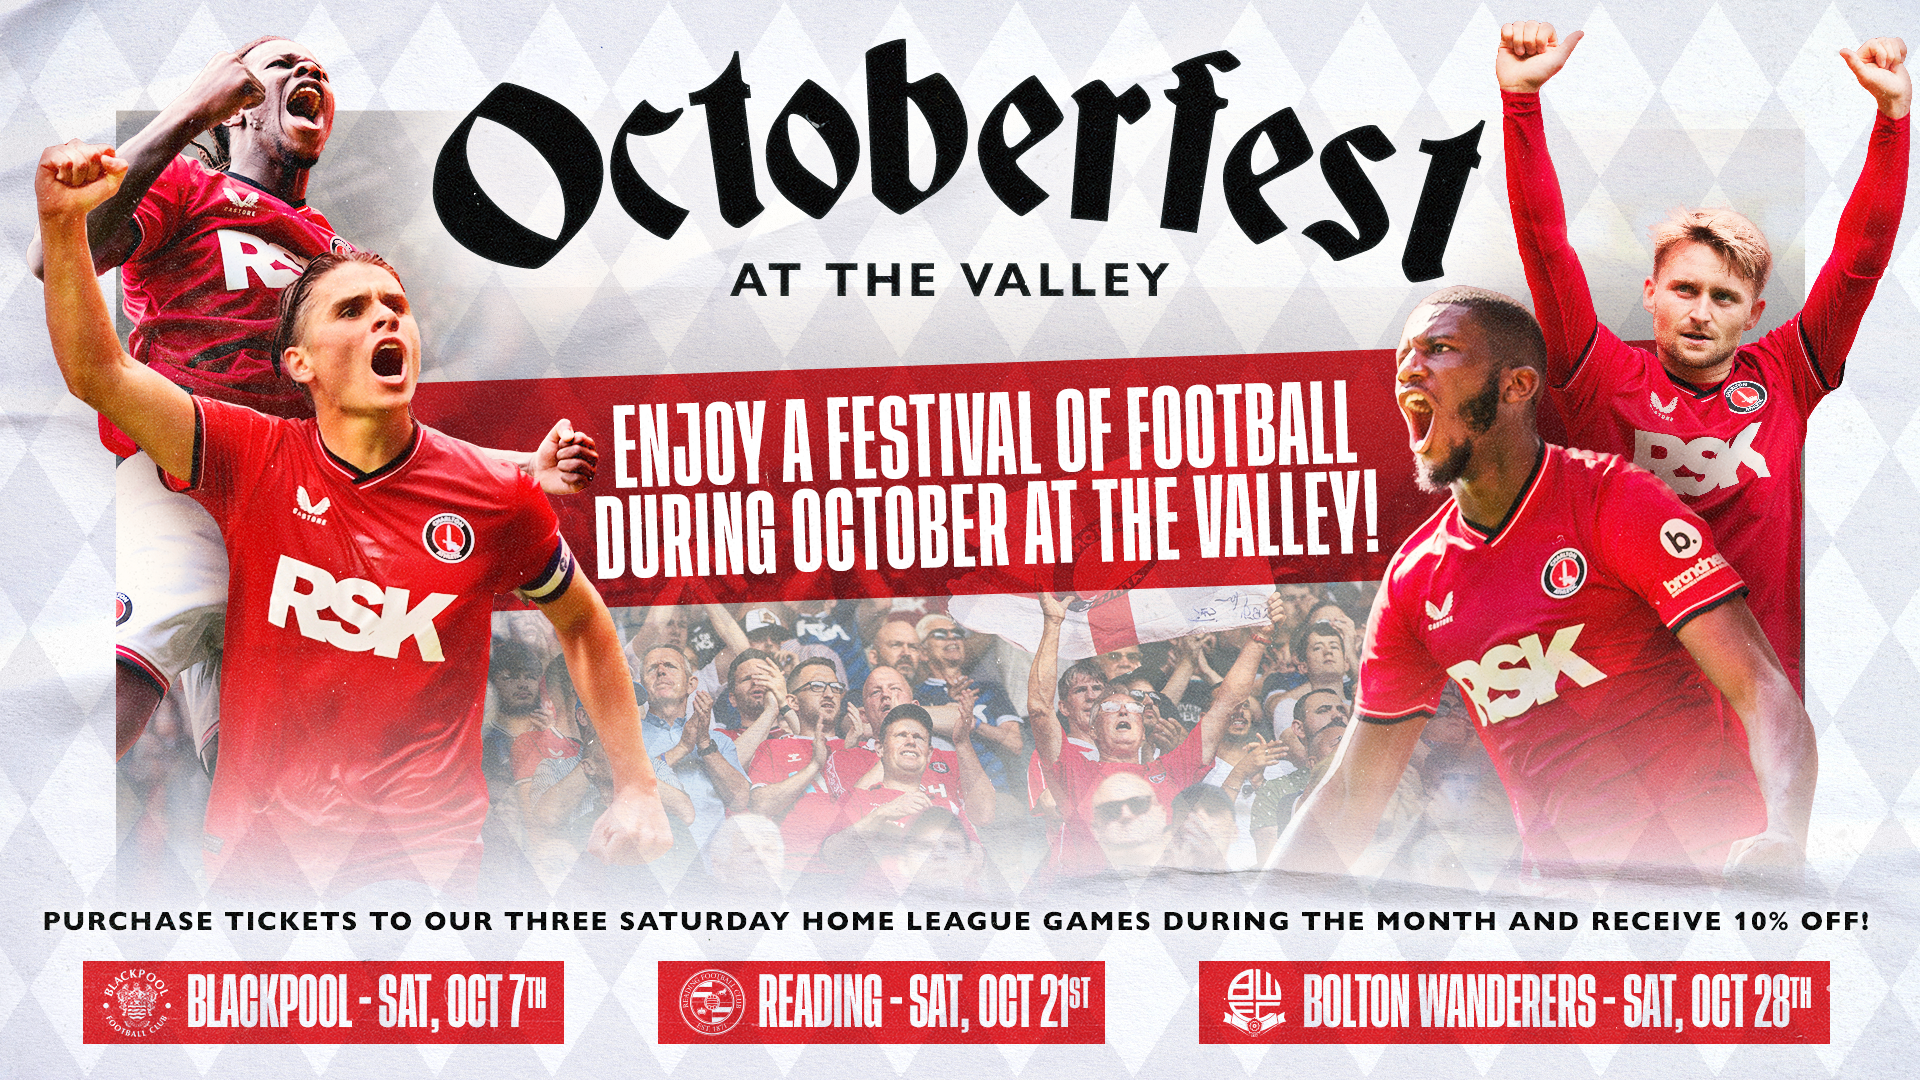 Octoberfest at The Valley